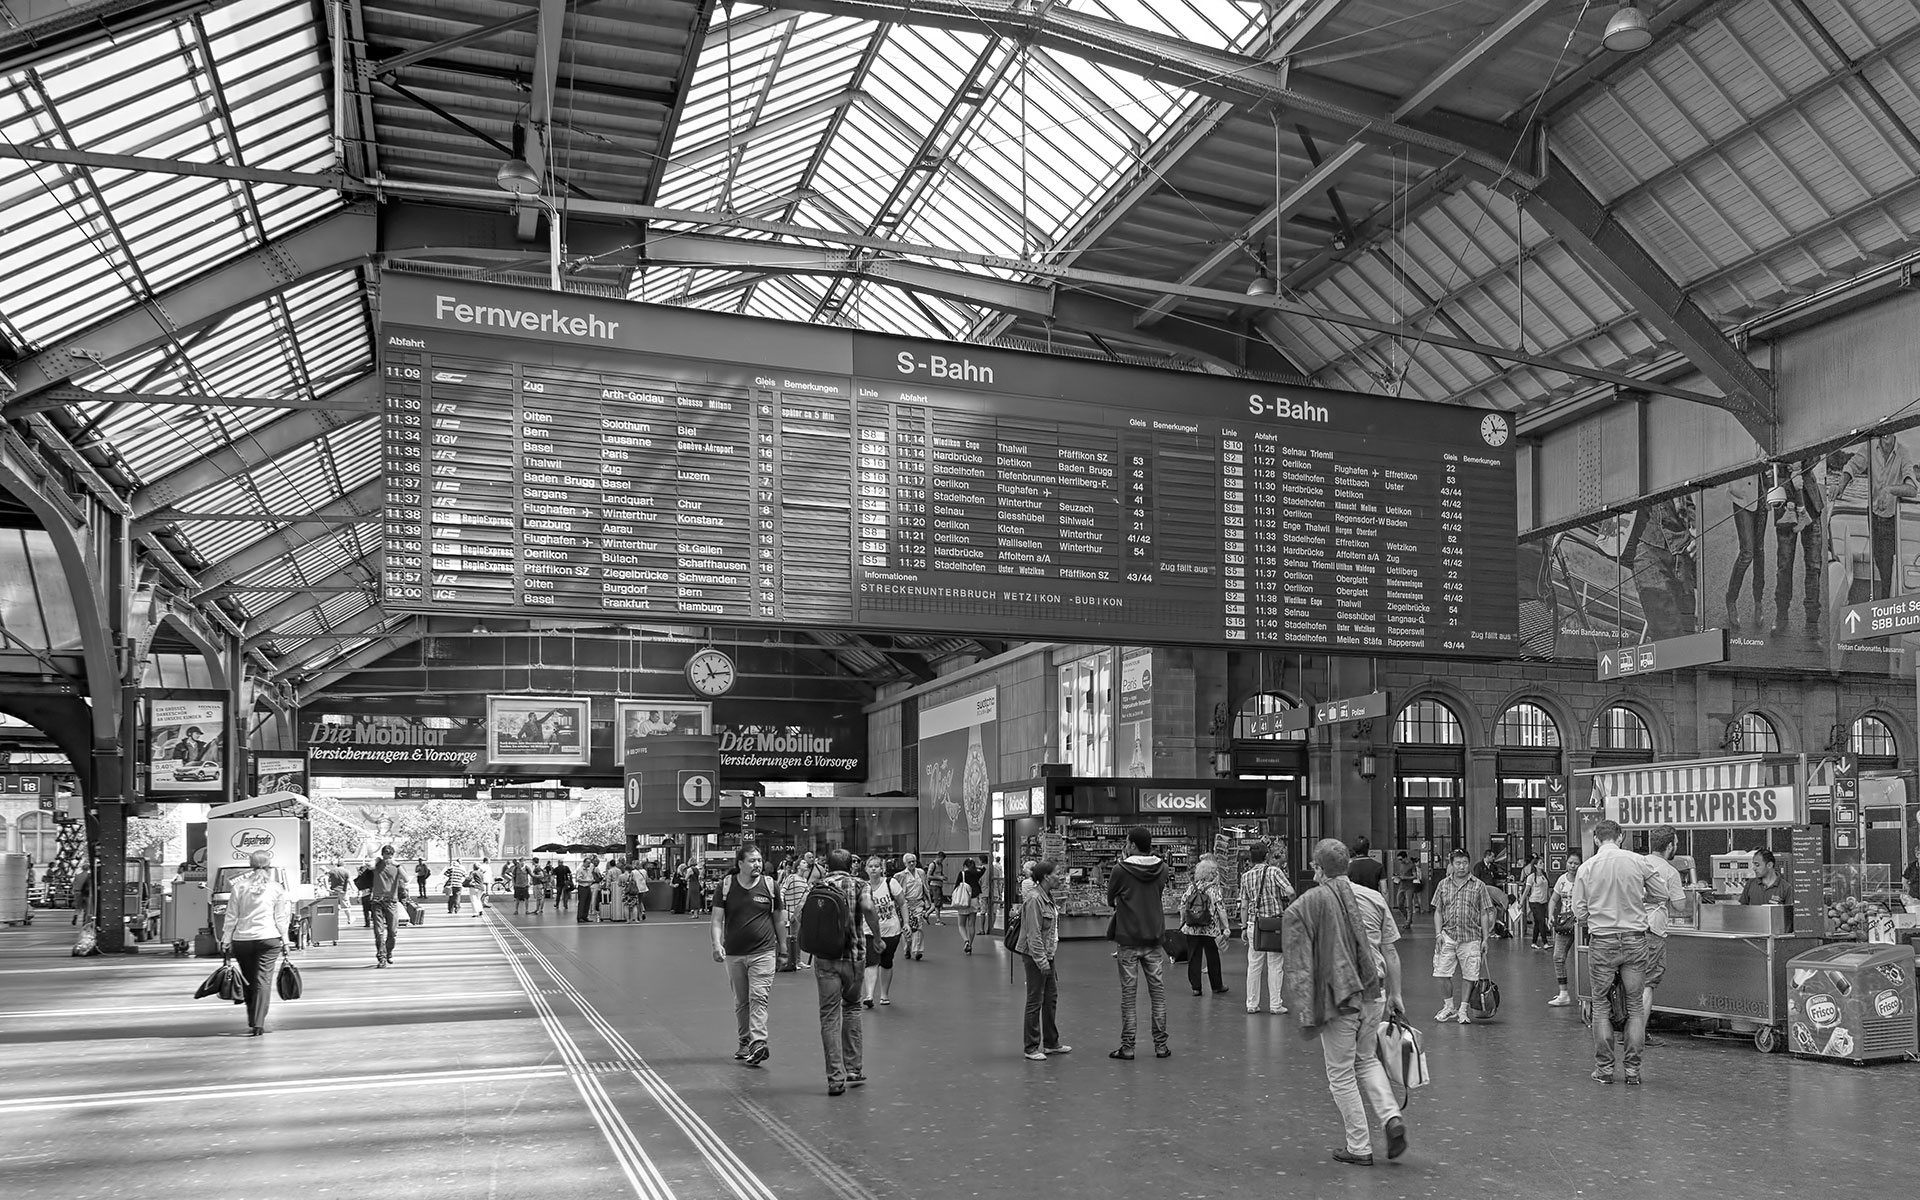 Zurich HB, the city's main railway station, still has a fine range of destination cities on its departure boards, with direct trains to Zagreb, Budapest, Prague, Paris, Venice, Bratislava, Berlin and many other cities. (photo © Denis Linine / dreamstime.com).